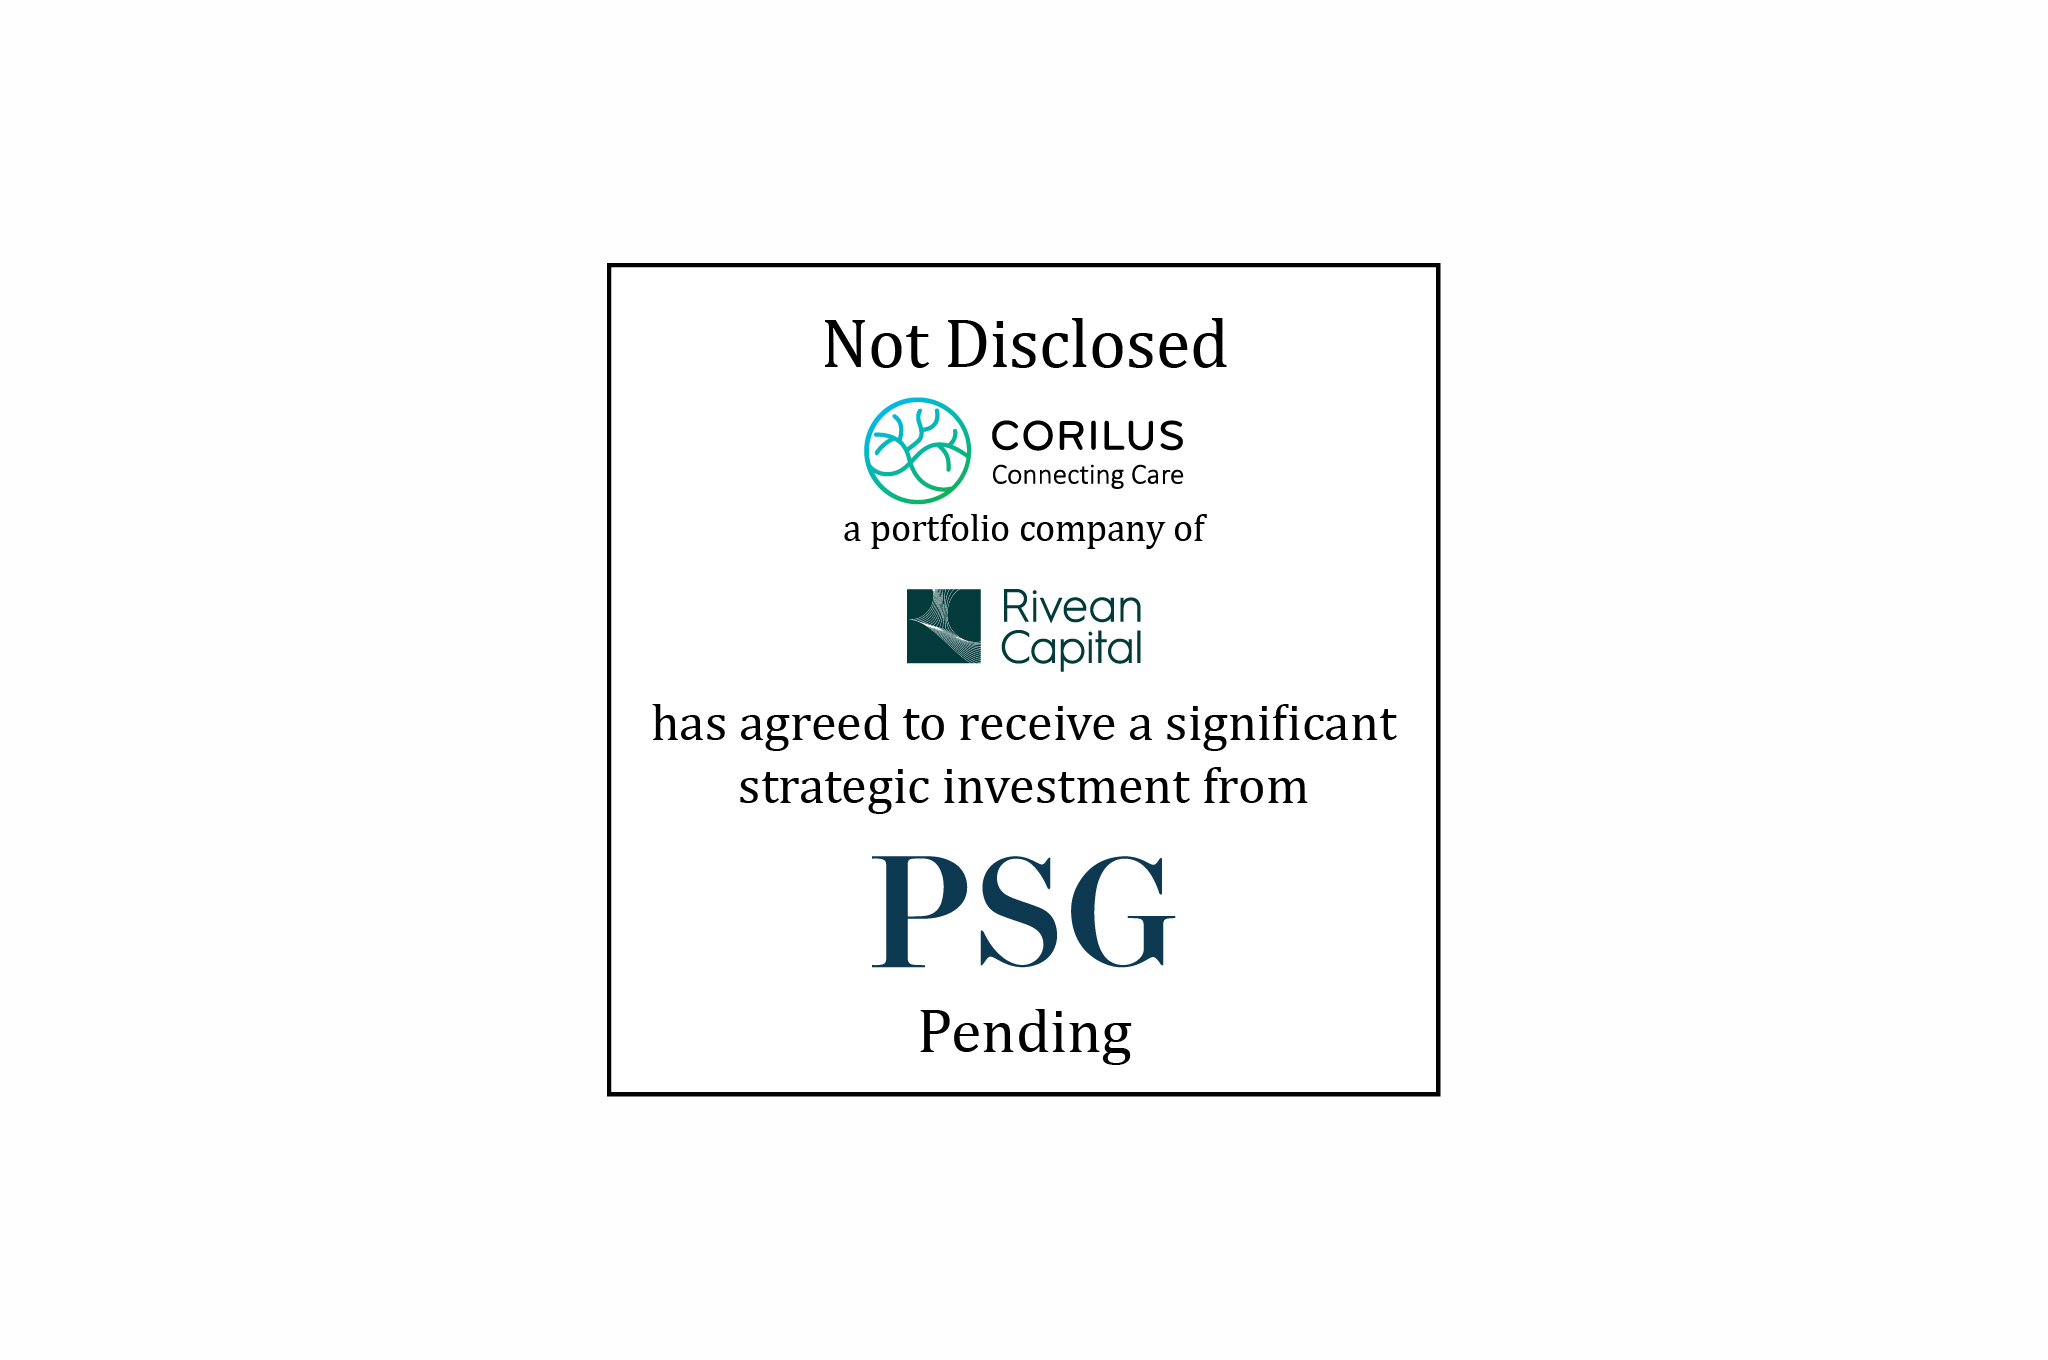 Not Disclosed - CORILUS Connecting Care a portfolio company of Rivean Capital has agreed to receive a significant strategic investment from PSG - Pending